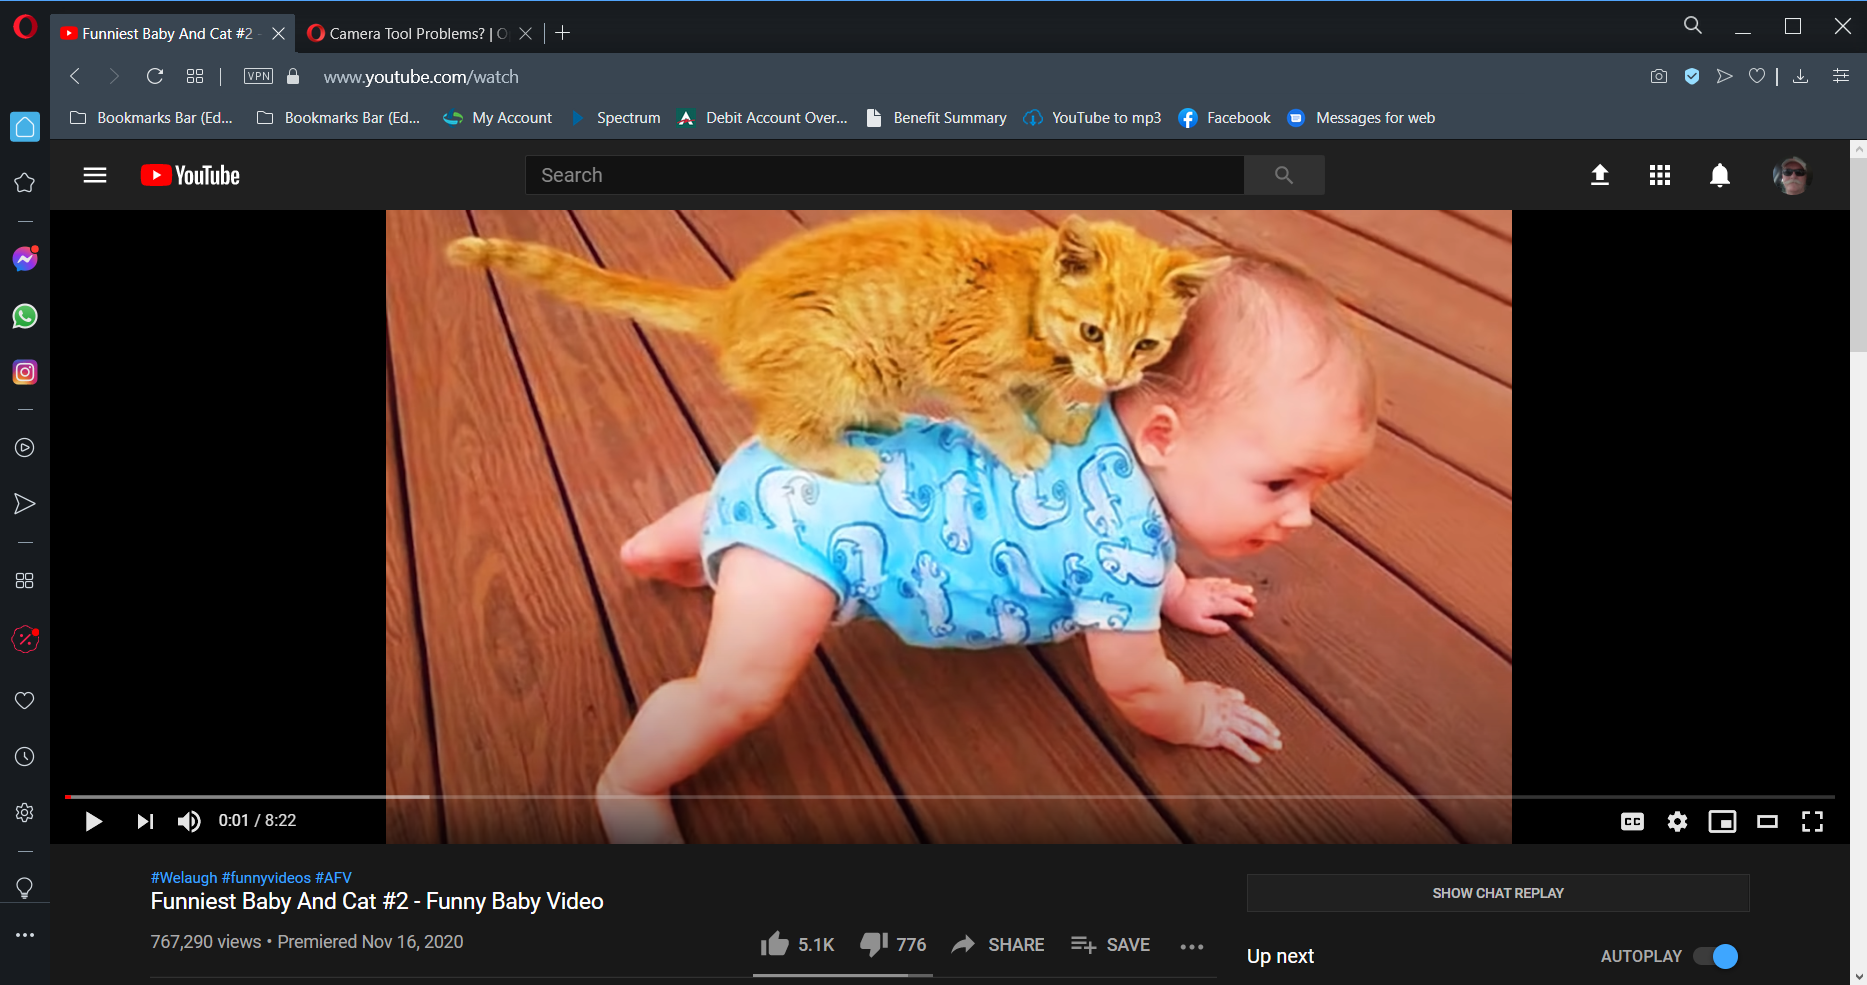 Funniest Baby And Cat #2 - Funny Baby Video - YouTube - Opera 11_29_2020 6_07_54 PM.png